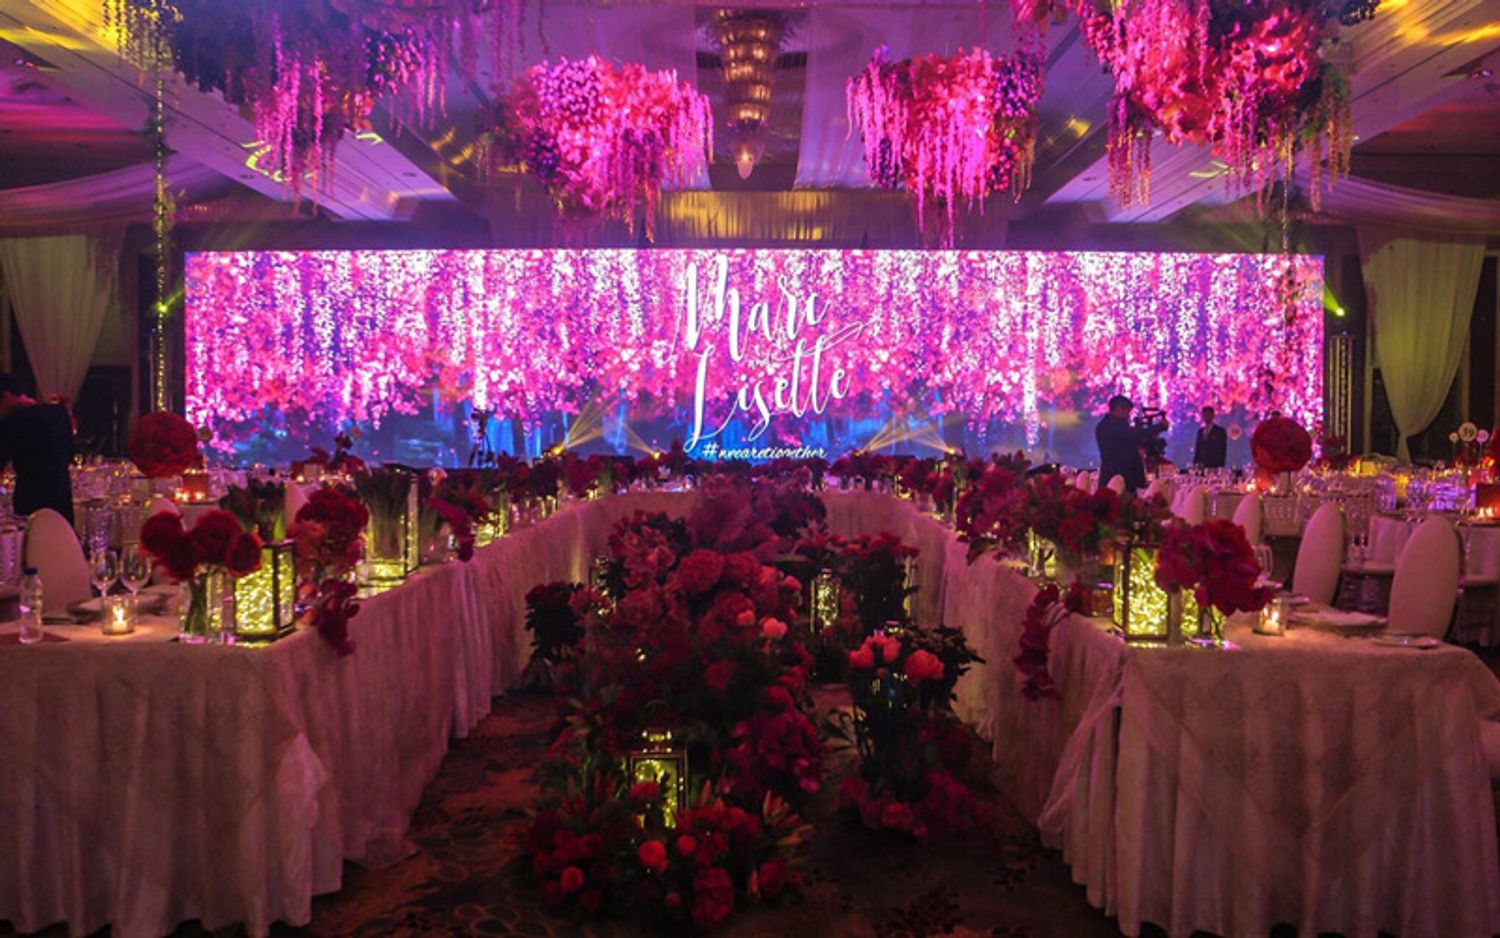 Luxurious wedding reception with a wide P391 LED display